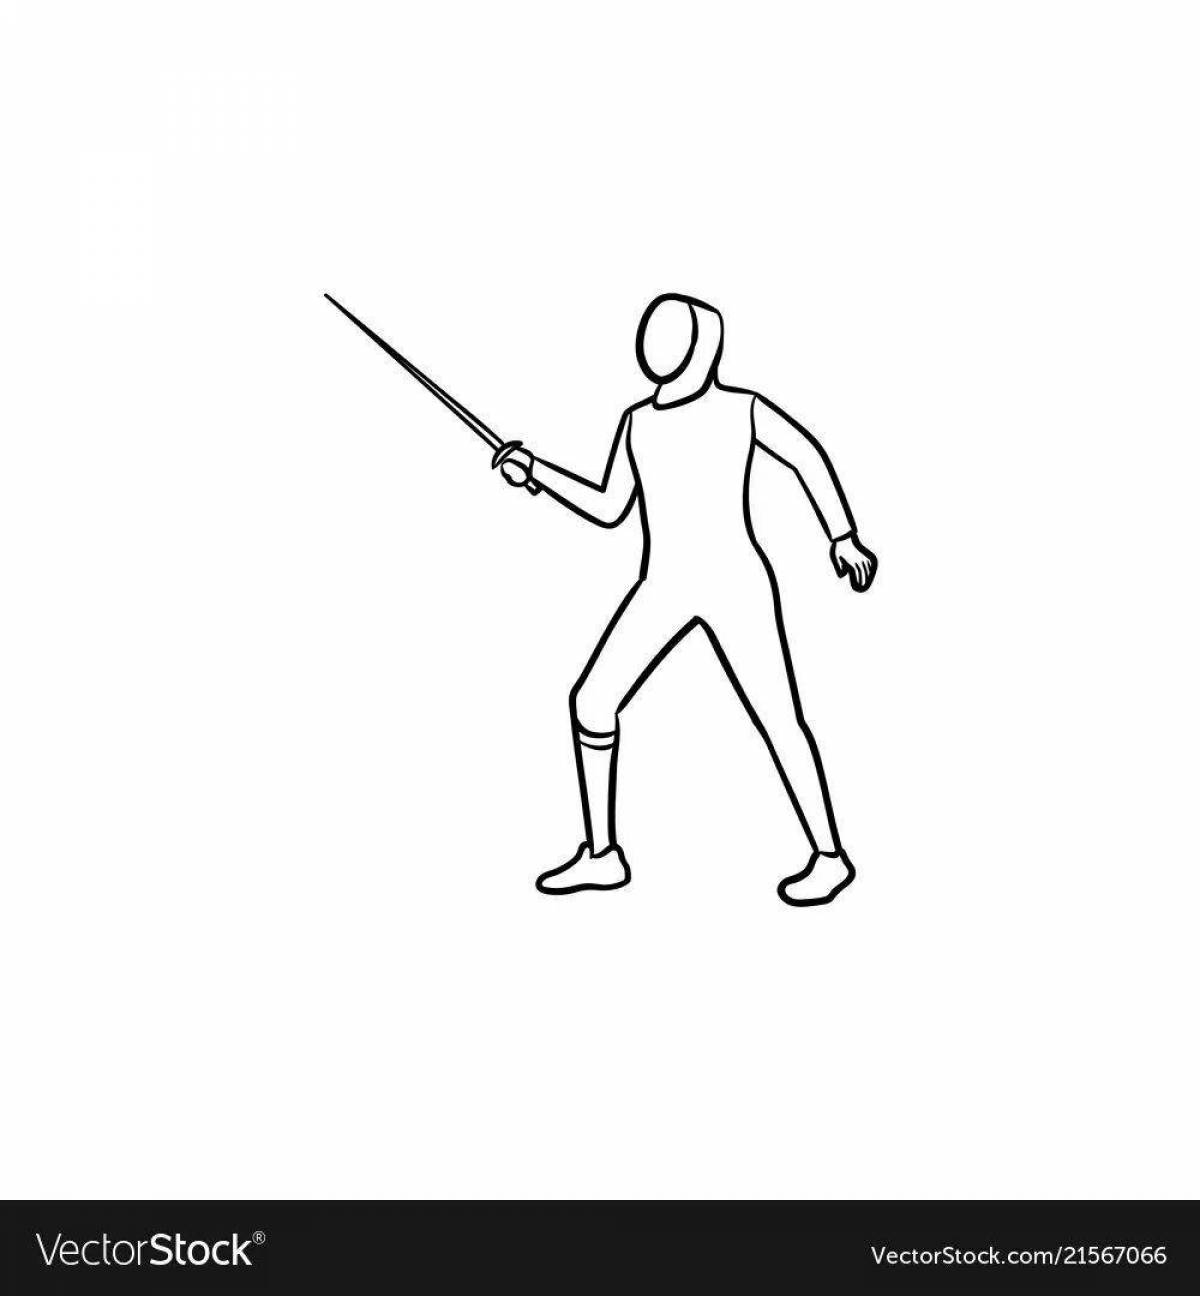 Interesting fencing coloring page